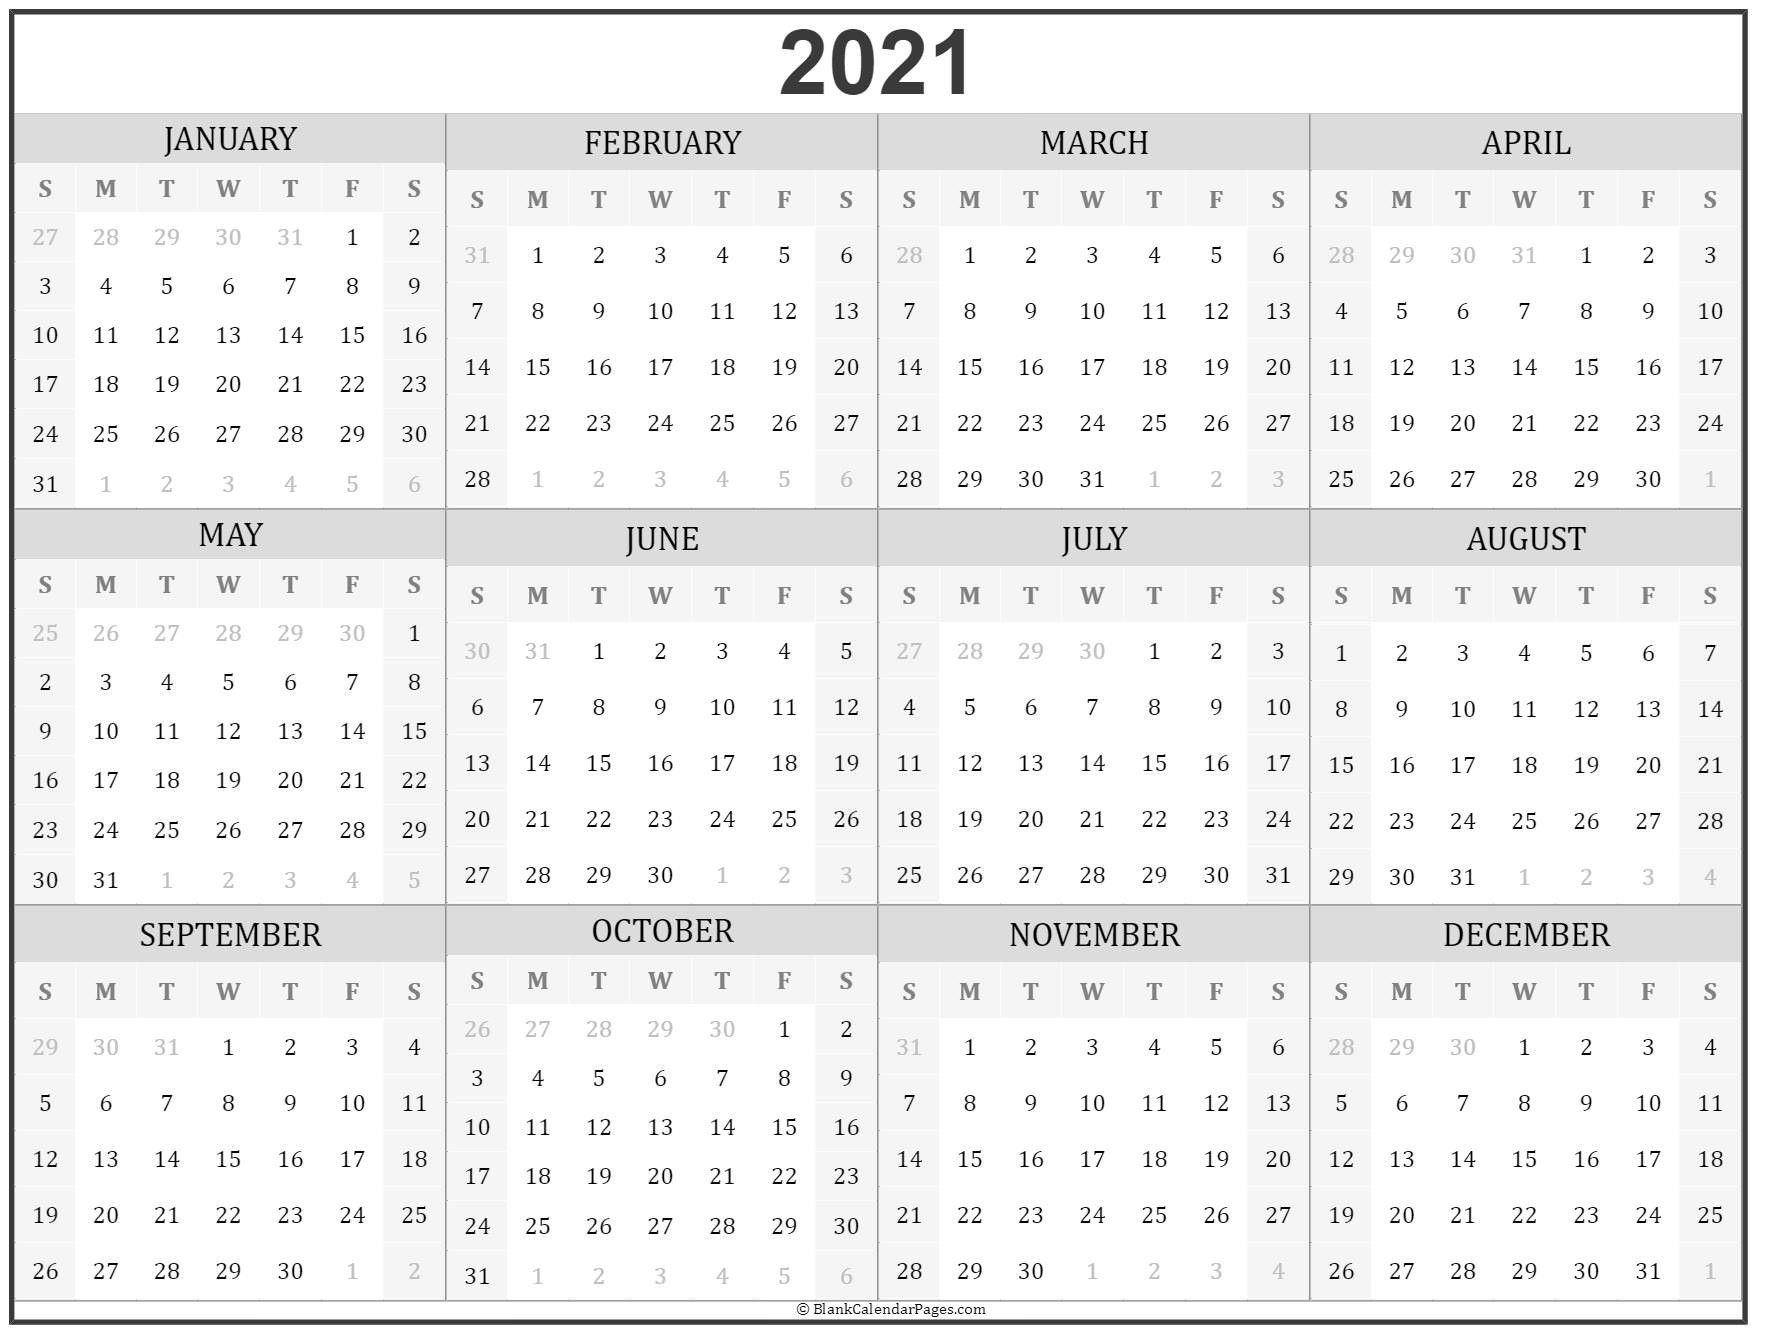 2021 Yearly Calendar Template Printable – Welcome For You To